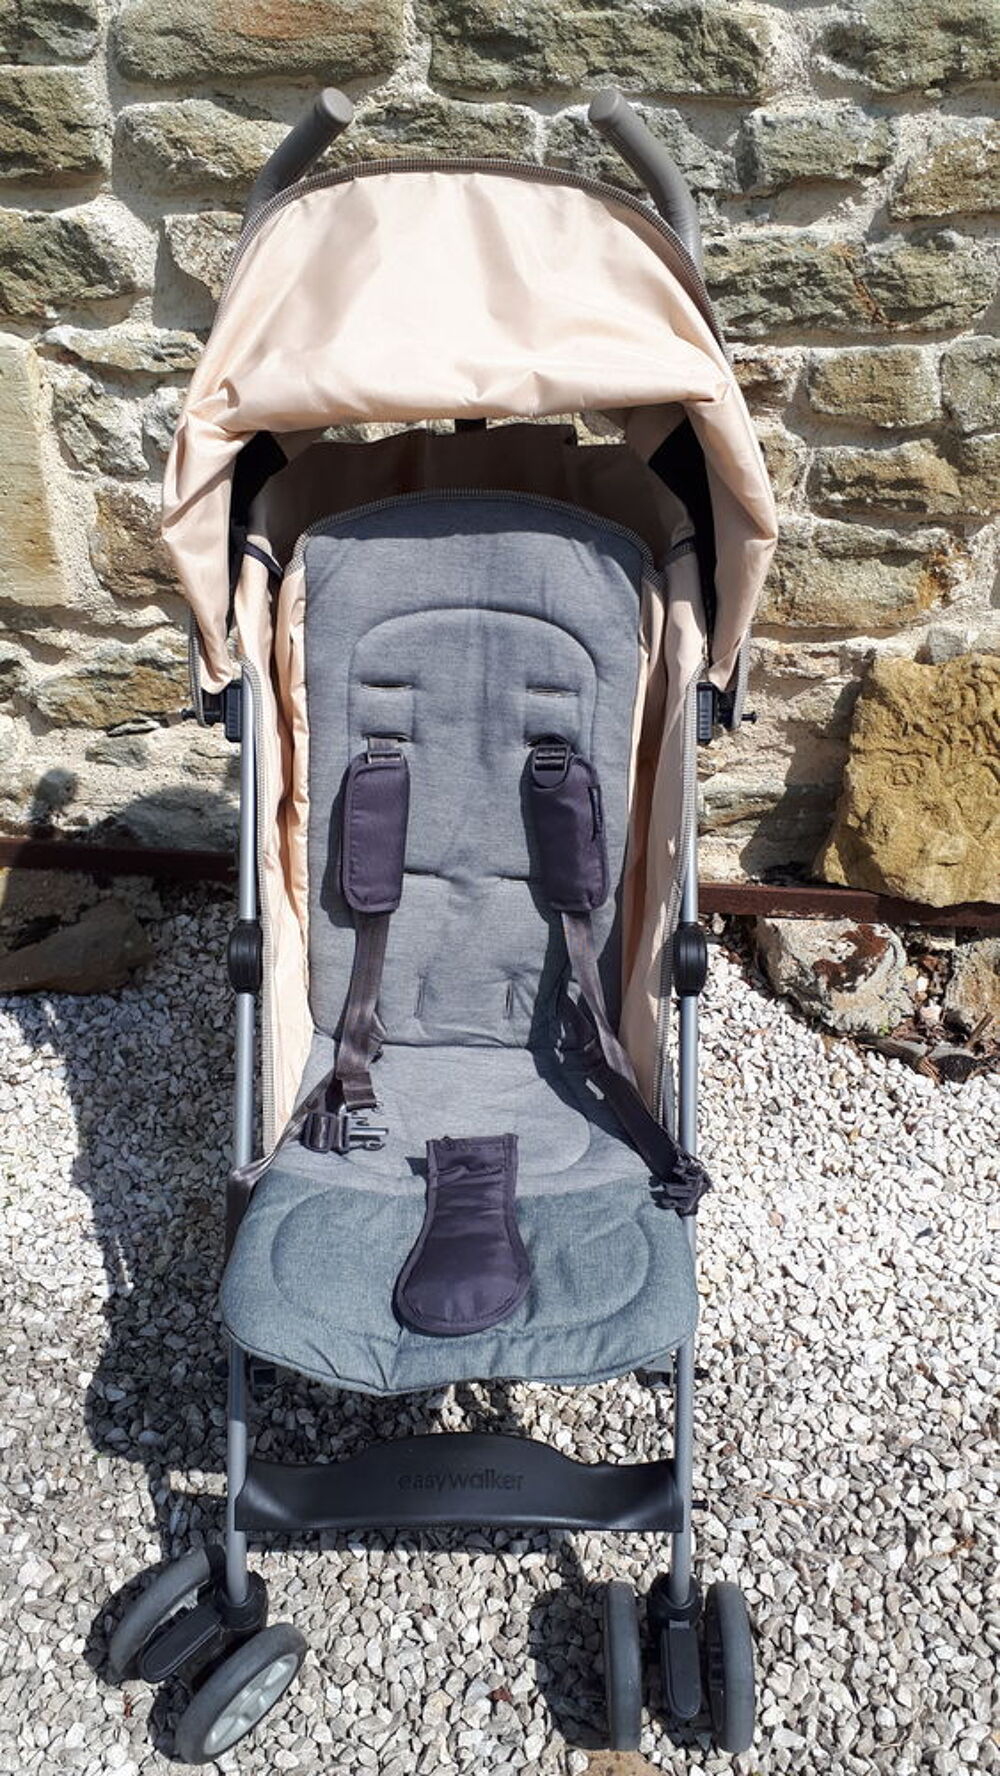 Poussette canne grise et taupe Marque easywalker buggy Puriculture